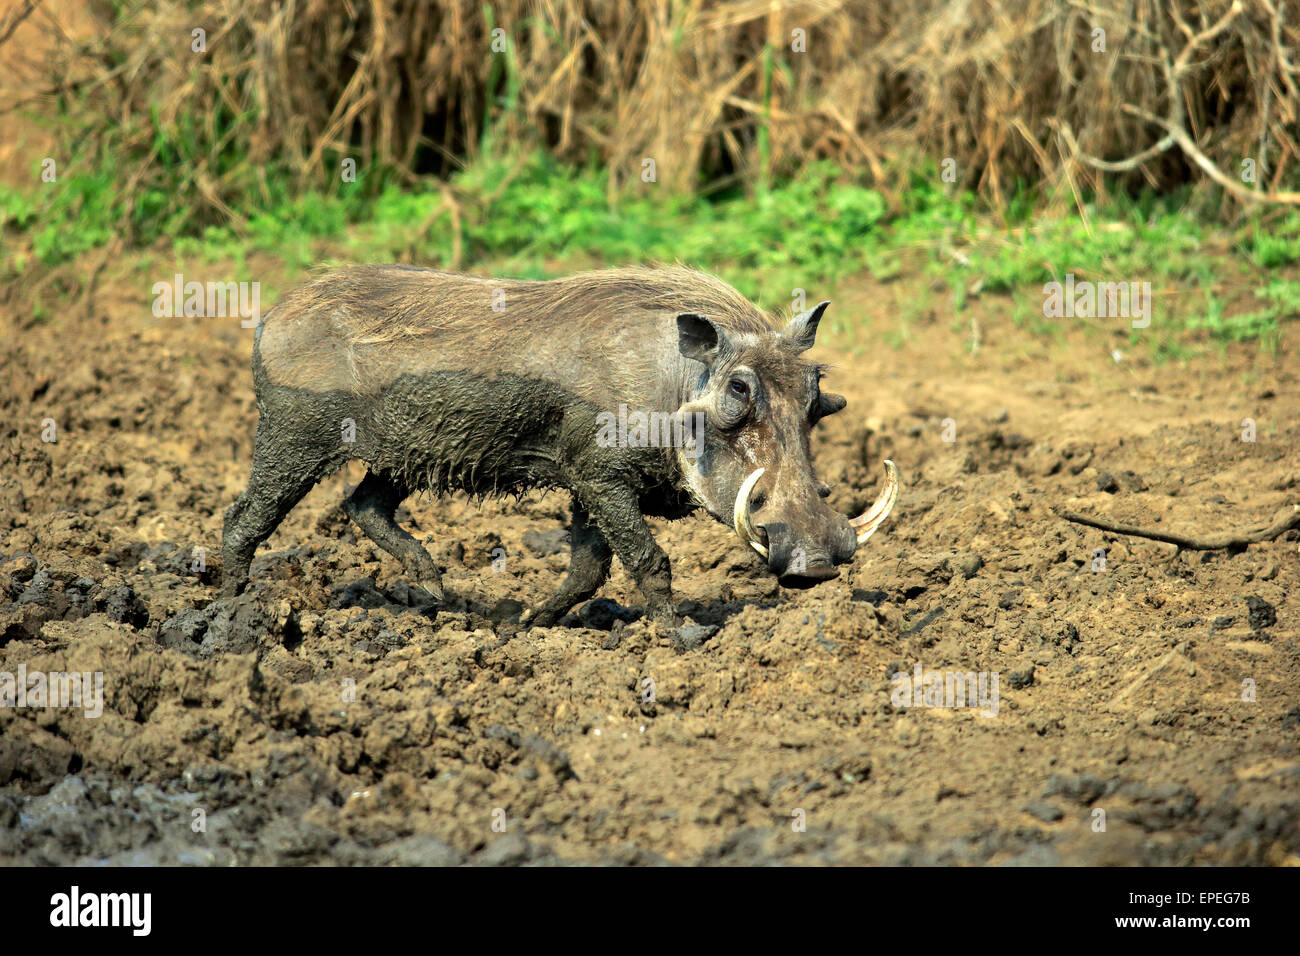 Warthog (Phacochoerus aethiopicus), adult, after a mud bath, Kruger National Park, South Africa Stock Photo